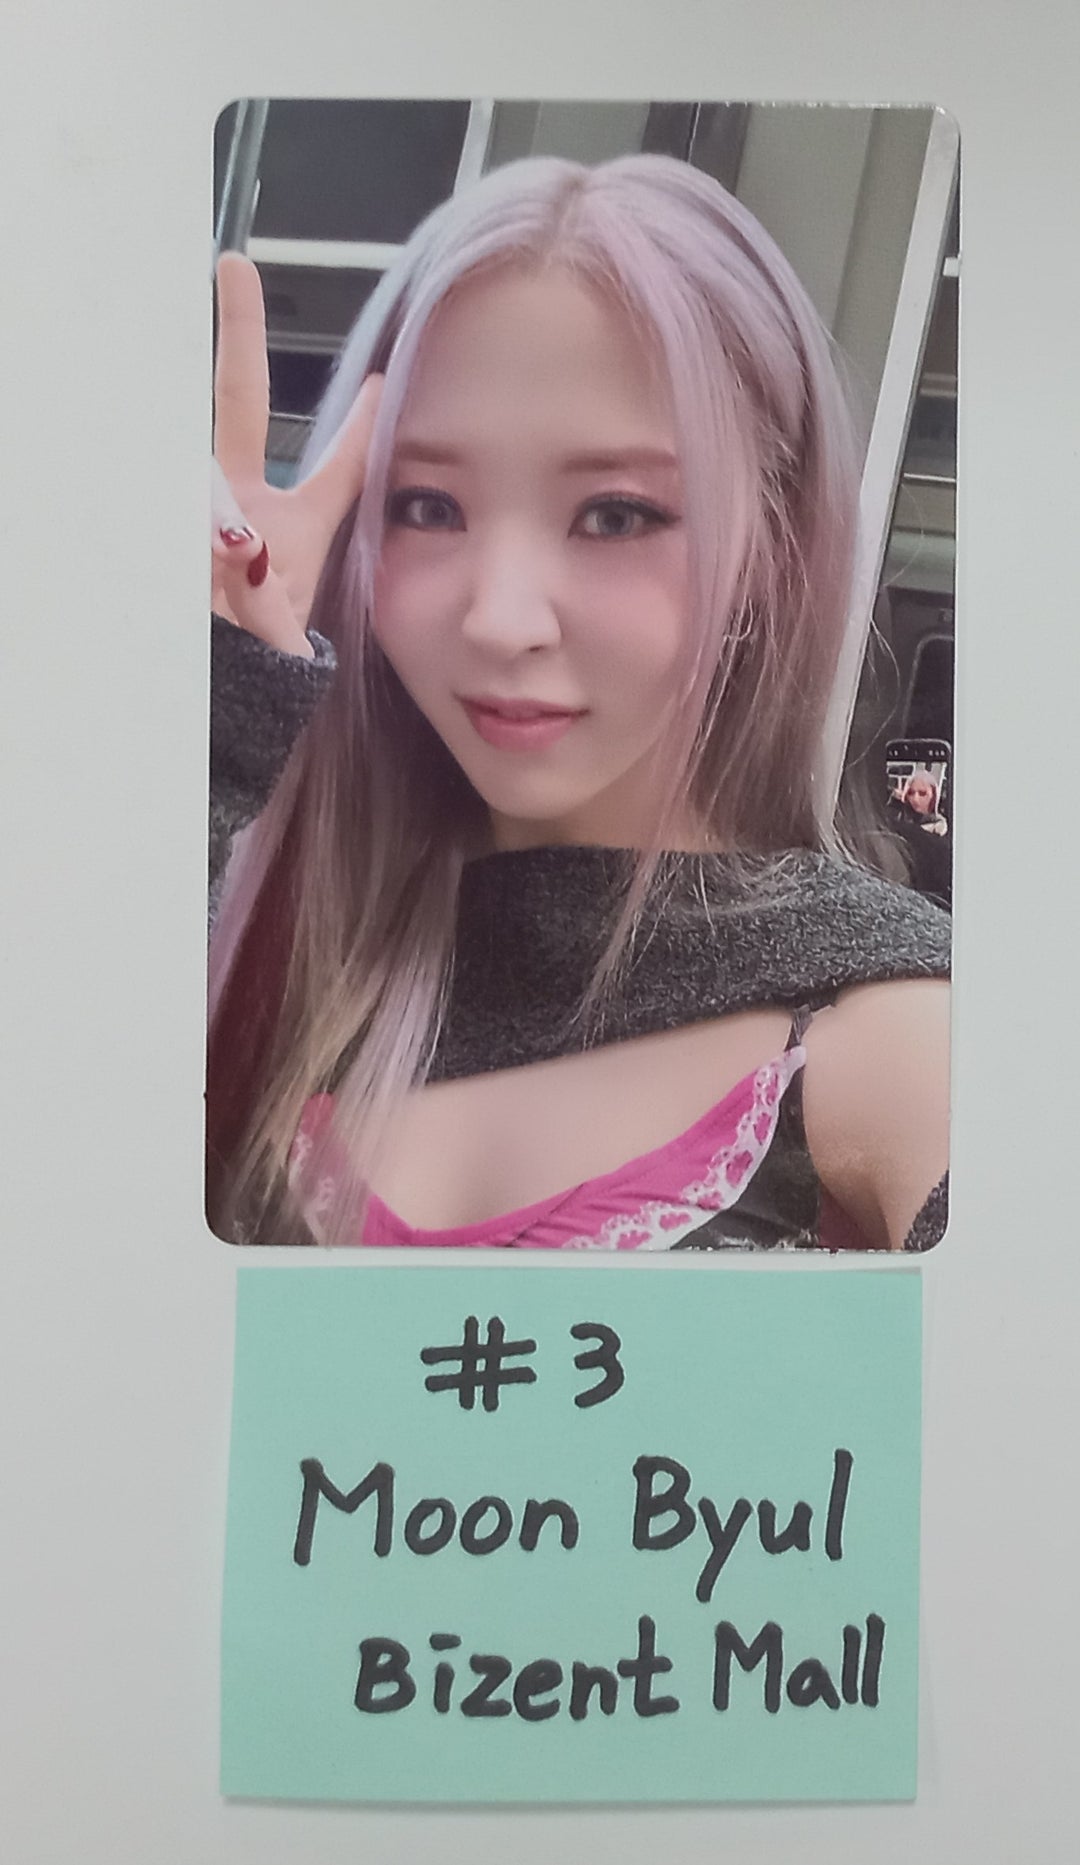 MOONBYUL "Starlit of Muse" - Bizent Mall Pre-Order Benefit Photocard [Museum Ver.] [24.2.23]